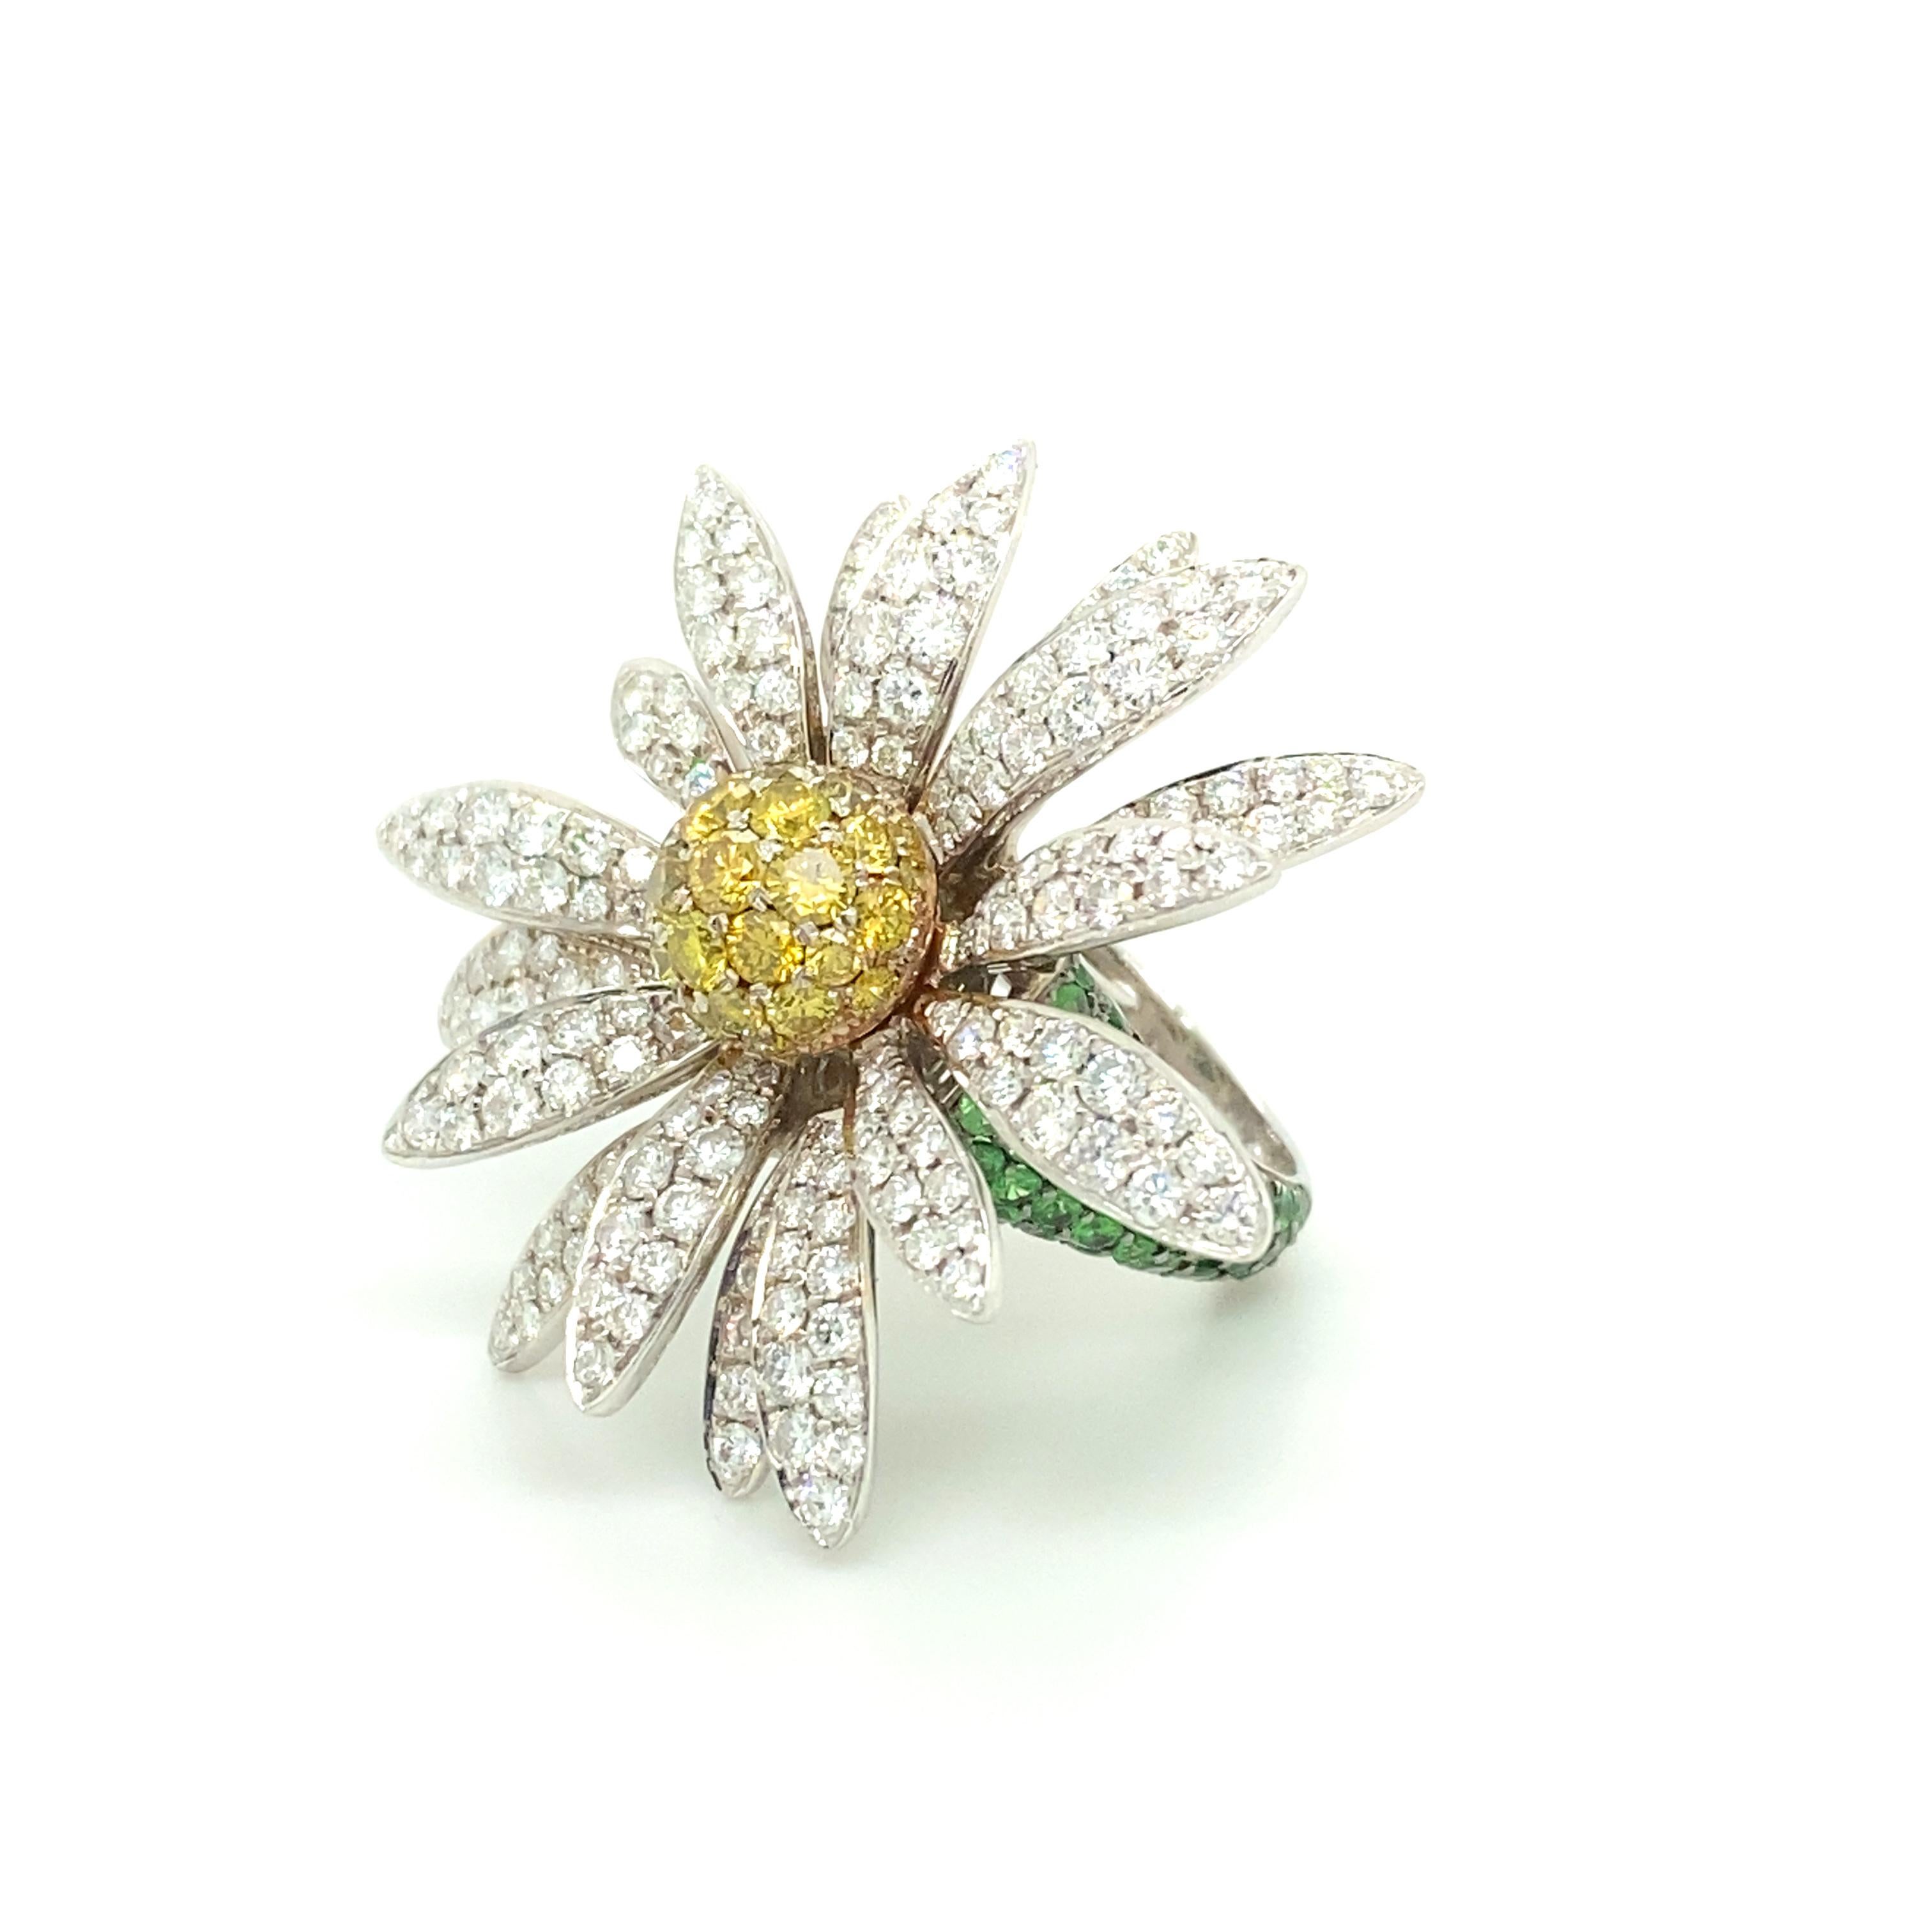 Brilliant Cut Daisy Ring with Diamonds and Tsavorites in 18 Karat White Gold by SILLAM 1835